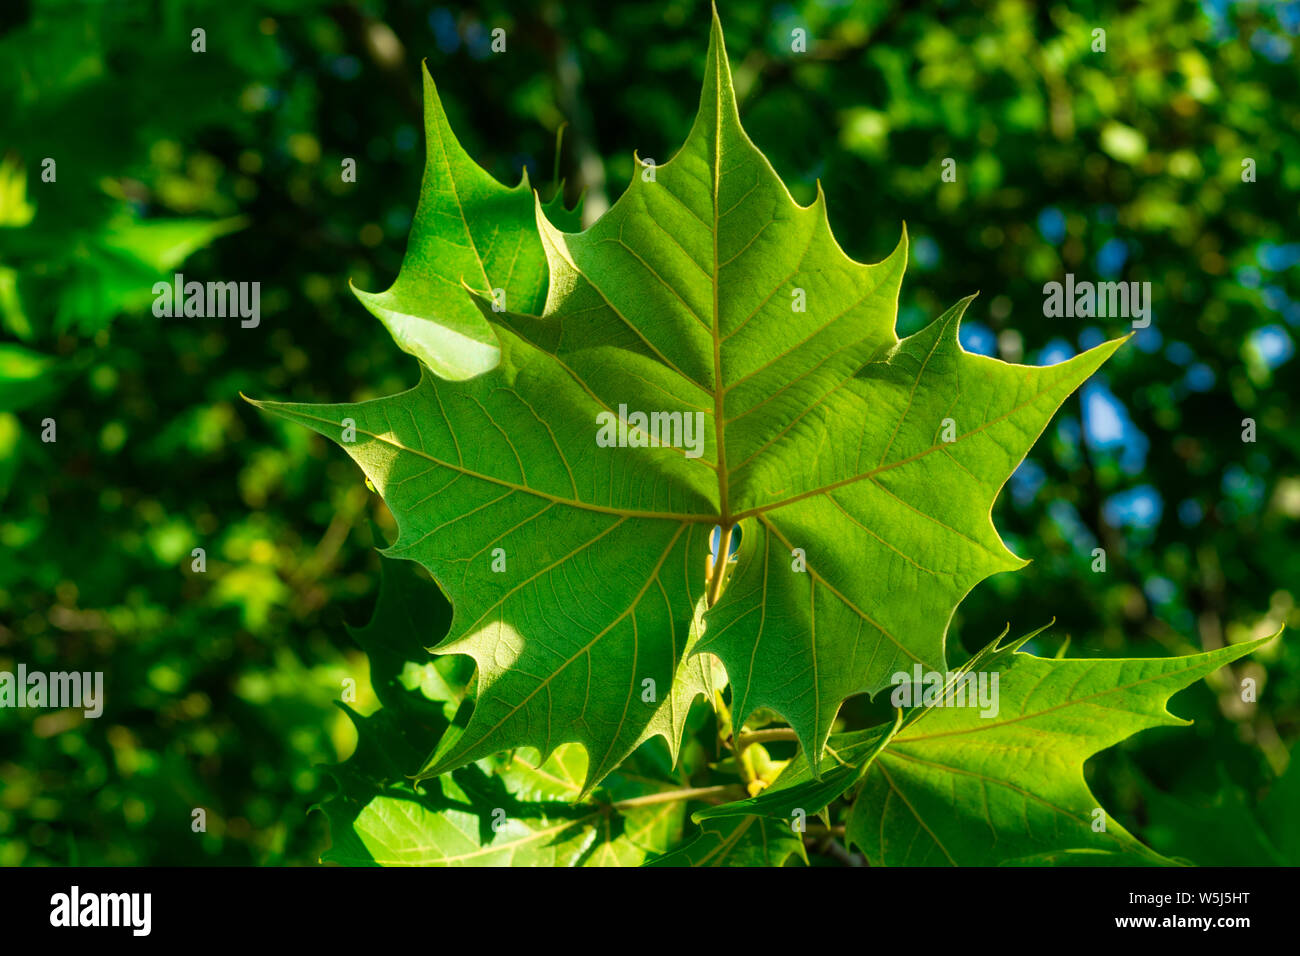 Light, shadow and shape make for interesting patterns. Stock Photo